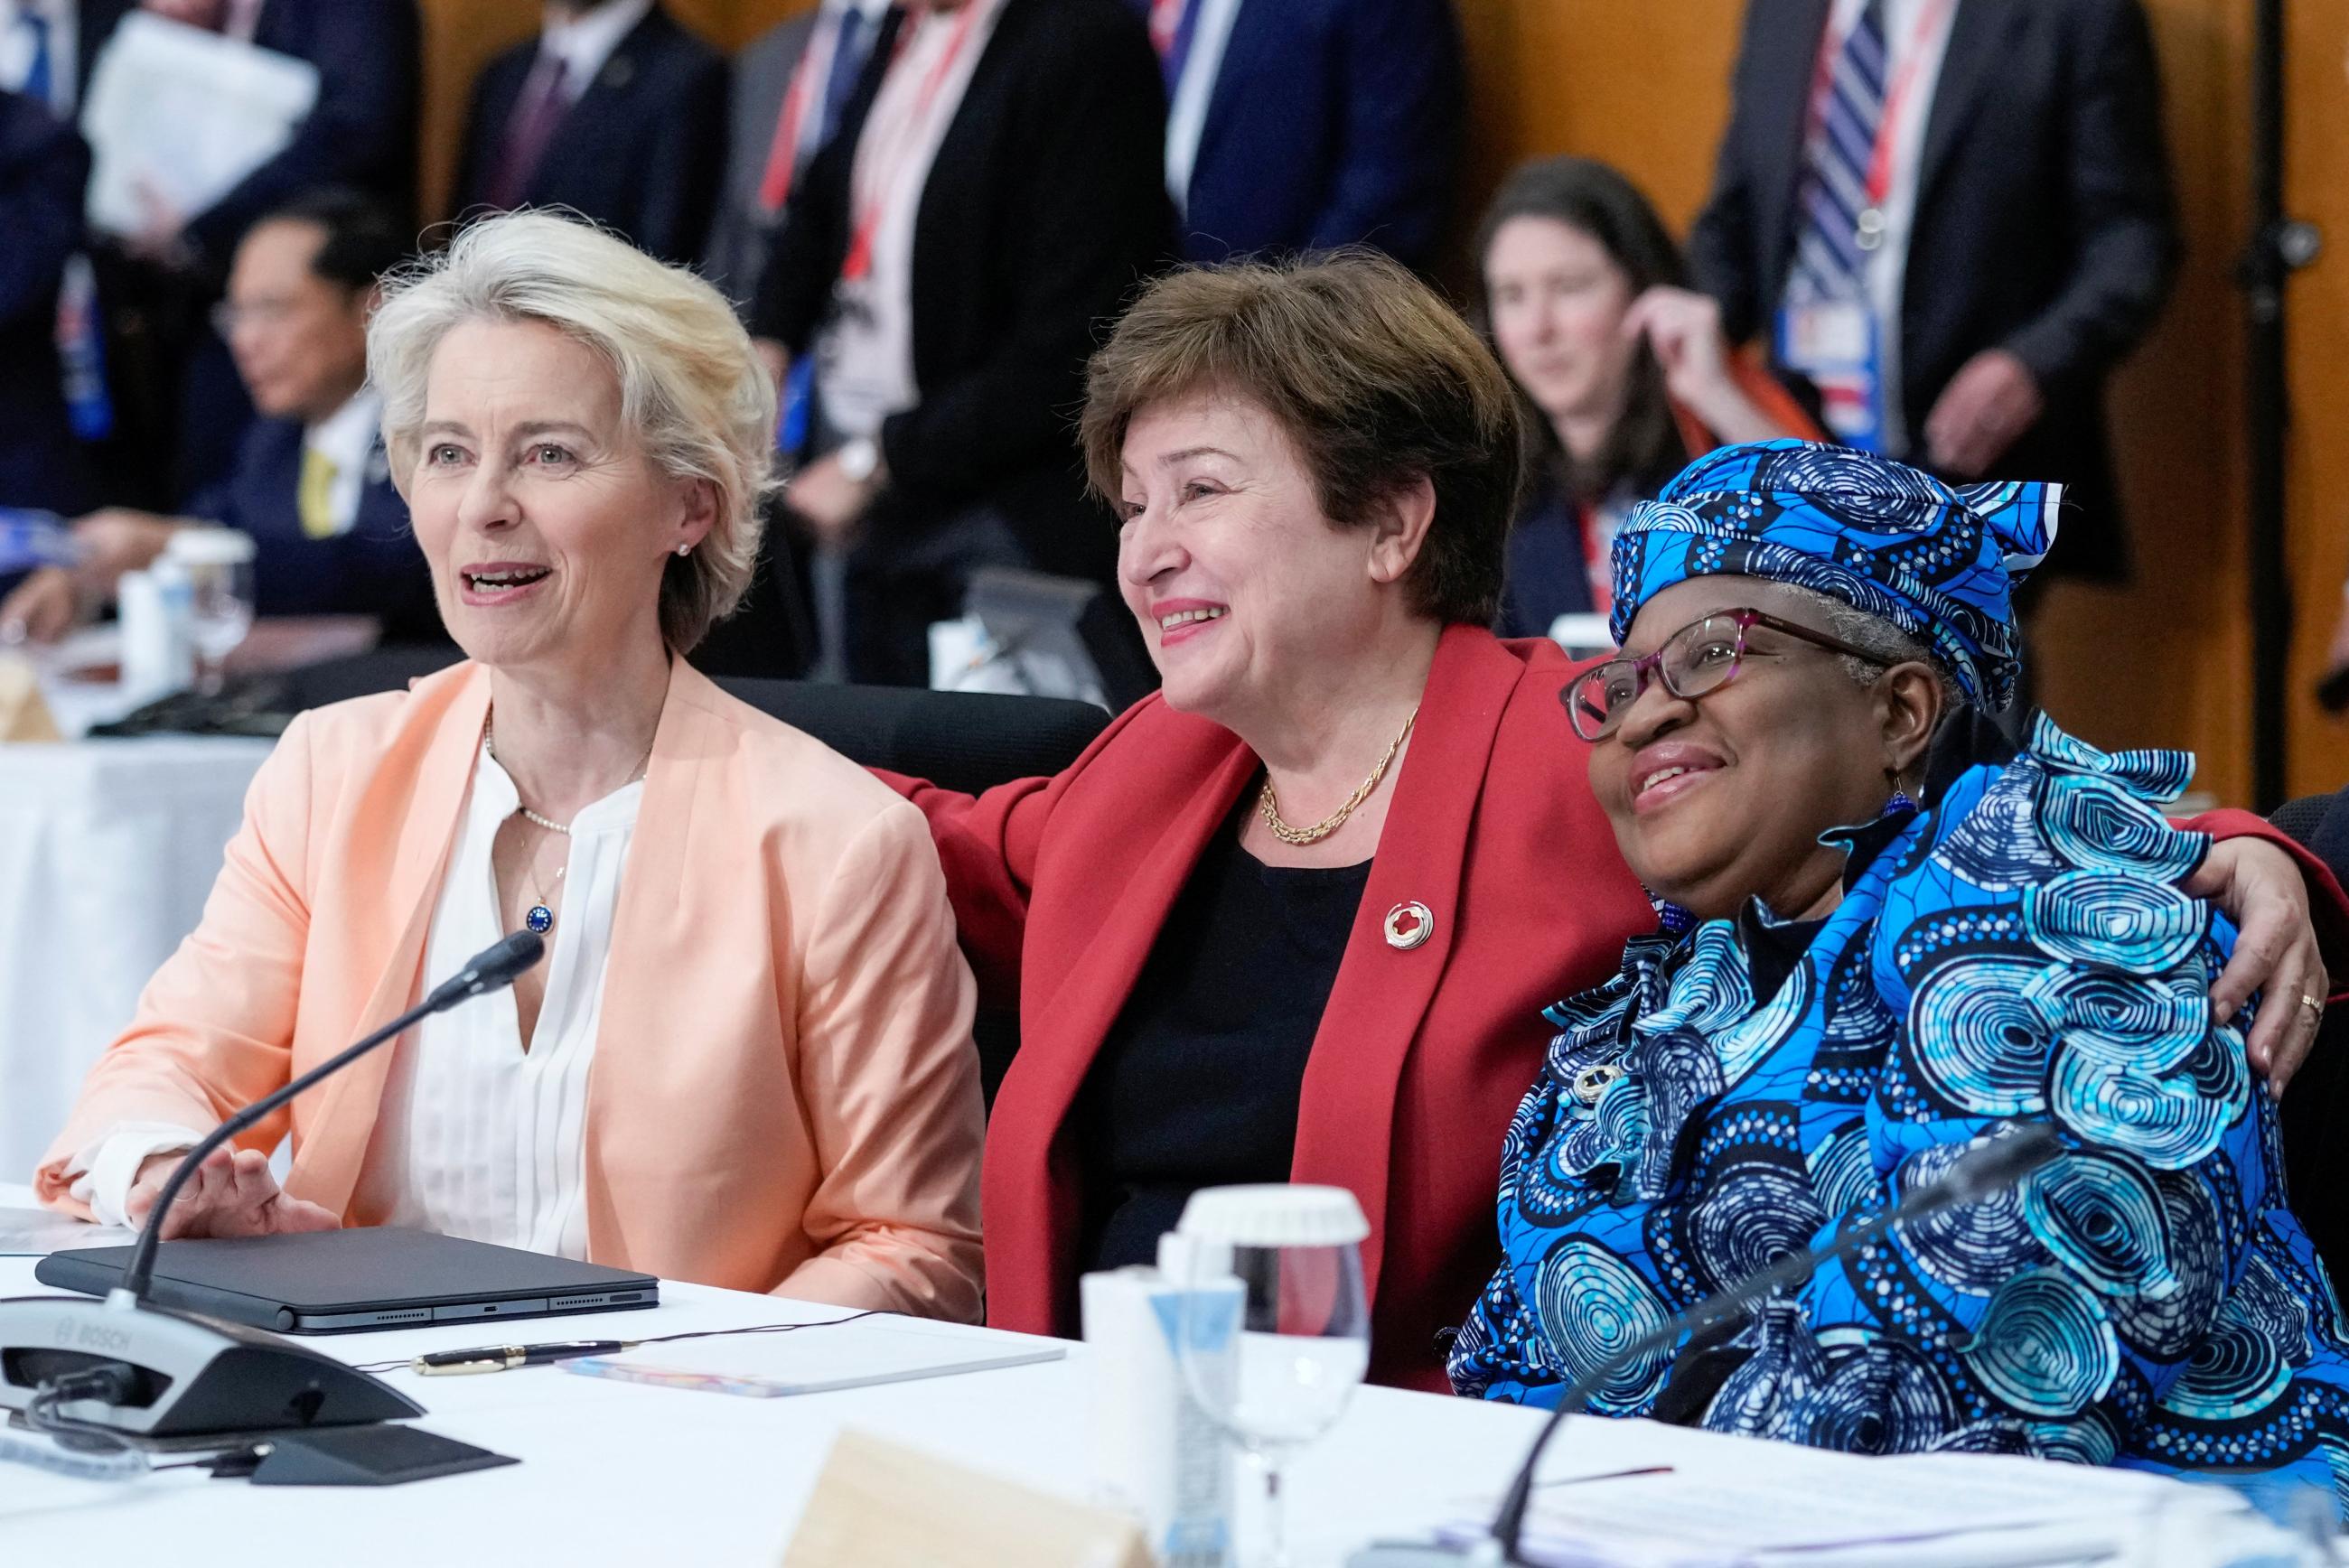 European Commission President Ursula von der Leyen, Managing Director of the IMF Kristalina Georgieva and Director-General of the World Trade Organization, Ngozi Okonjo-Iweala pose for a photo during a G7 working session on food, health and development during the G7 Summit in Hiroshima, Japan, Saturday, May 20, 2023.